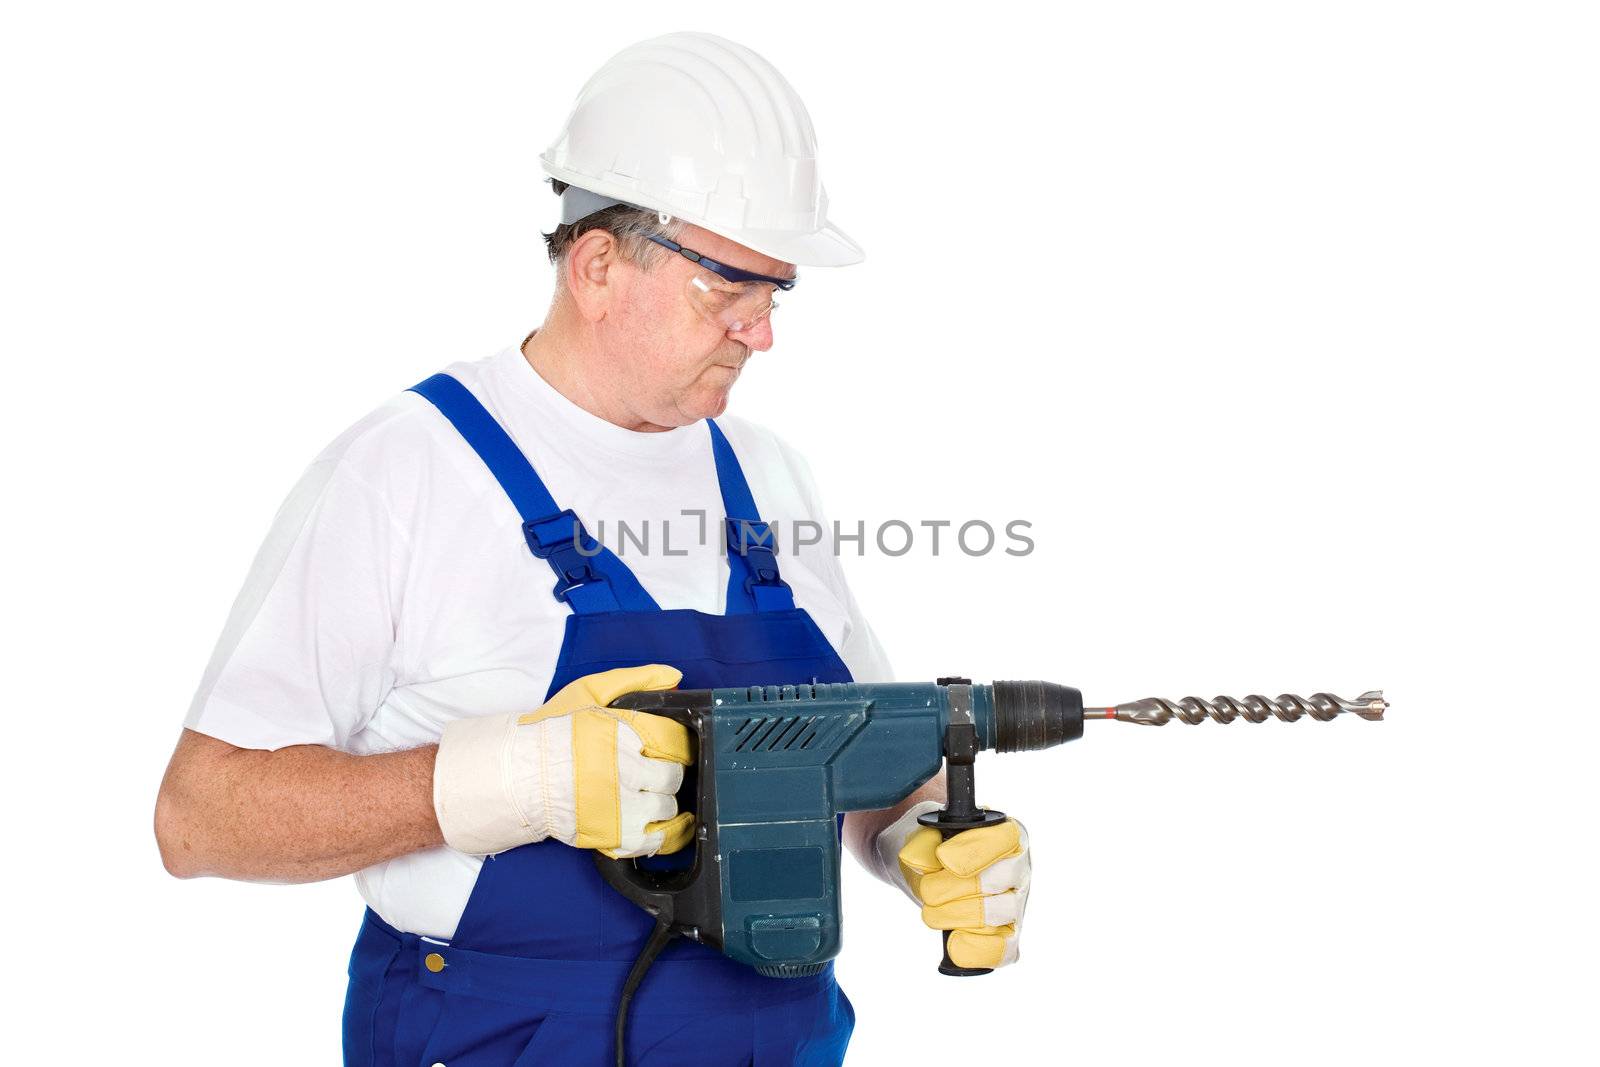 A construction worker holding drill for concrete and wearing proper safety equipment according to OSHA regulations, isolated on white background